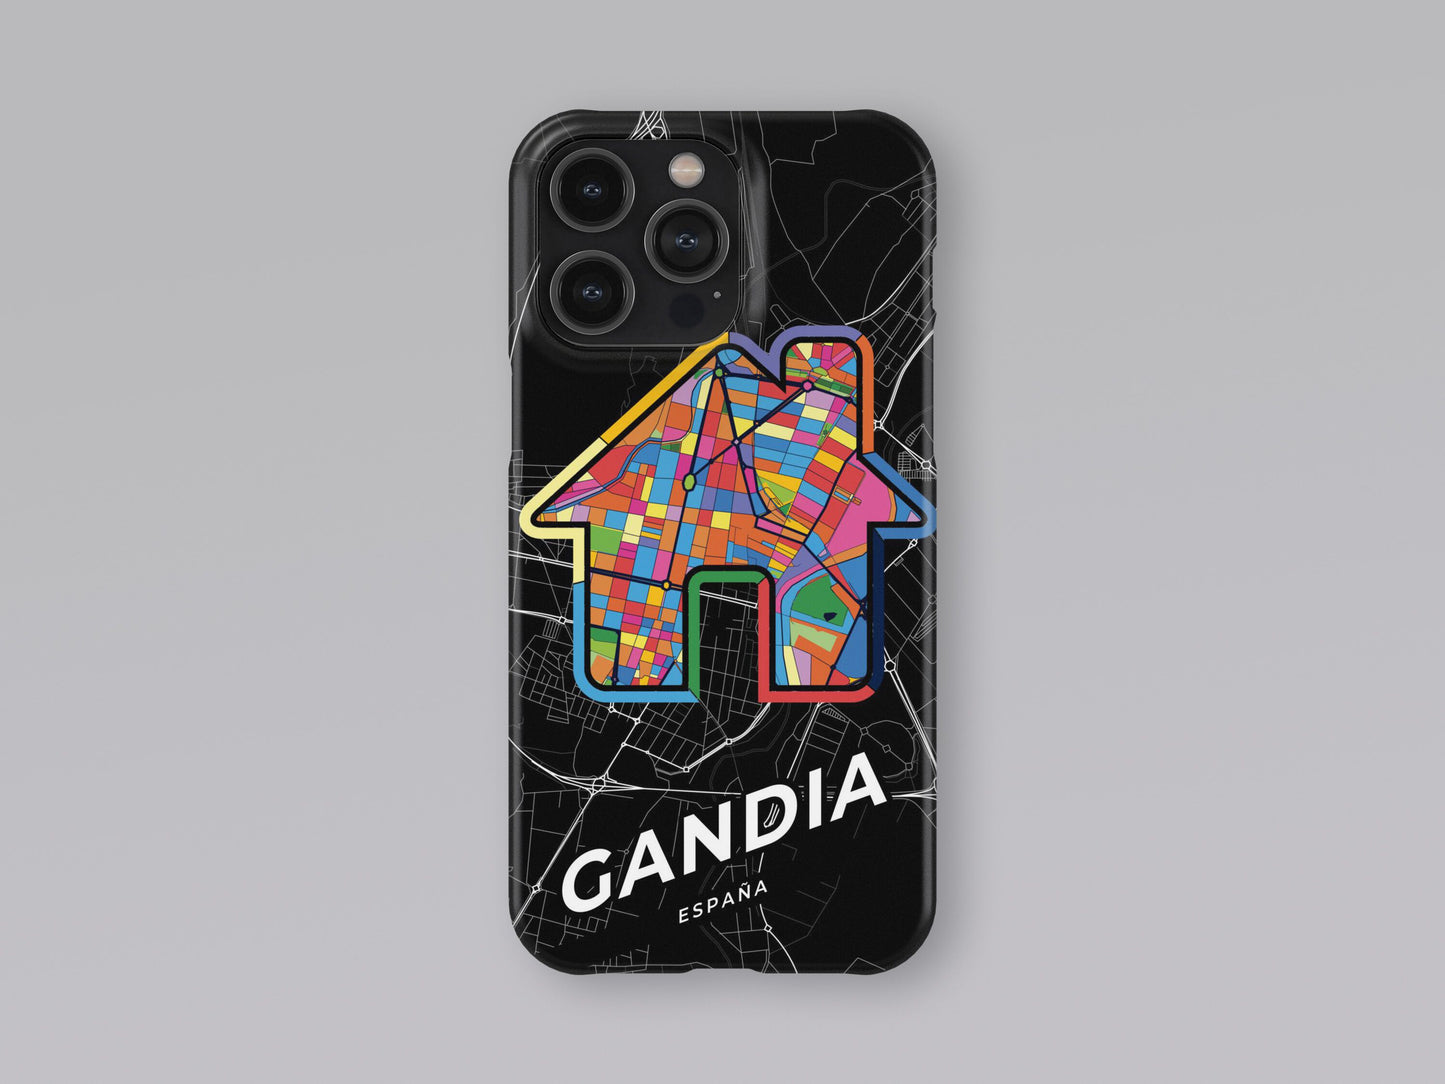 Gandia Spain slim phone case with colorful icon. Birthday, wedding or housewarming gift. Couple match cases. 3